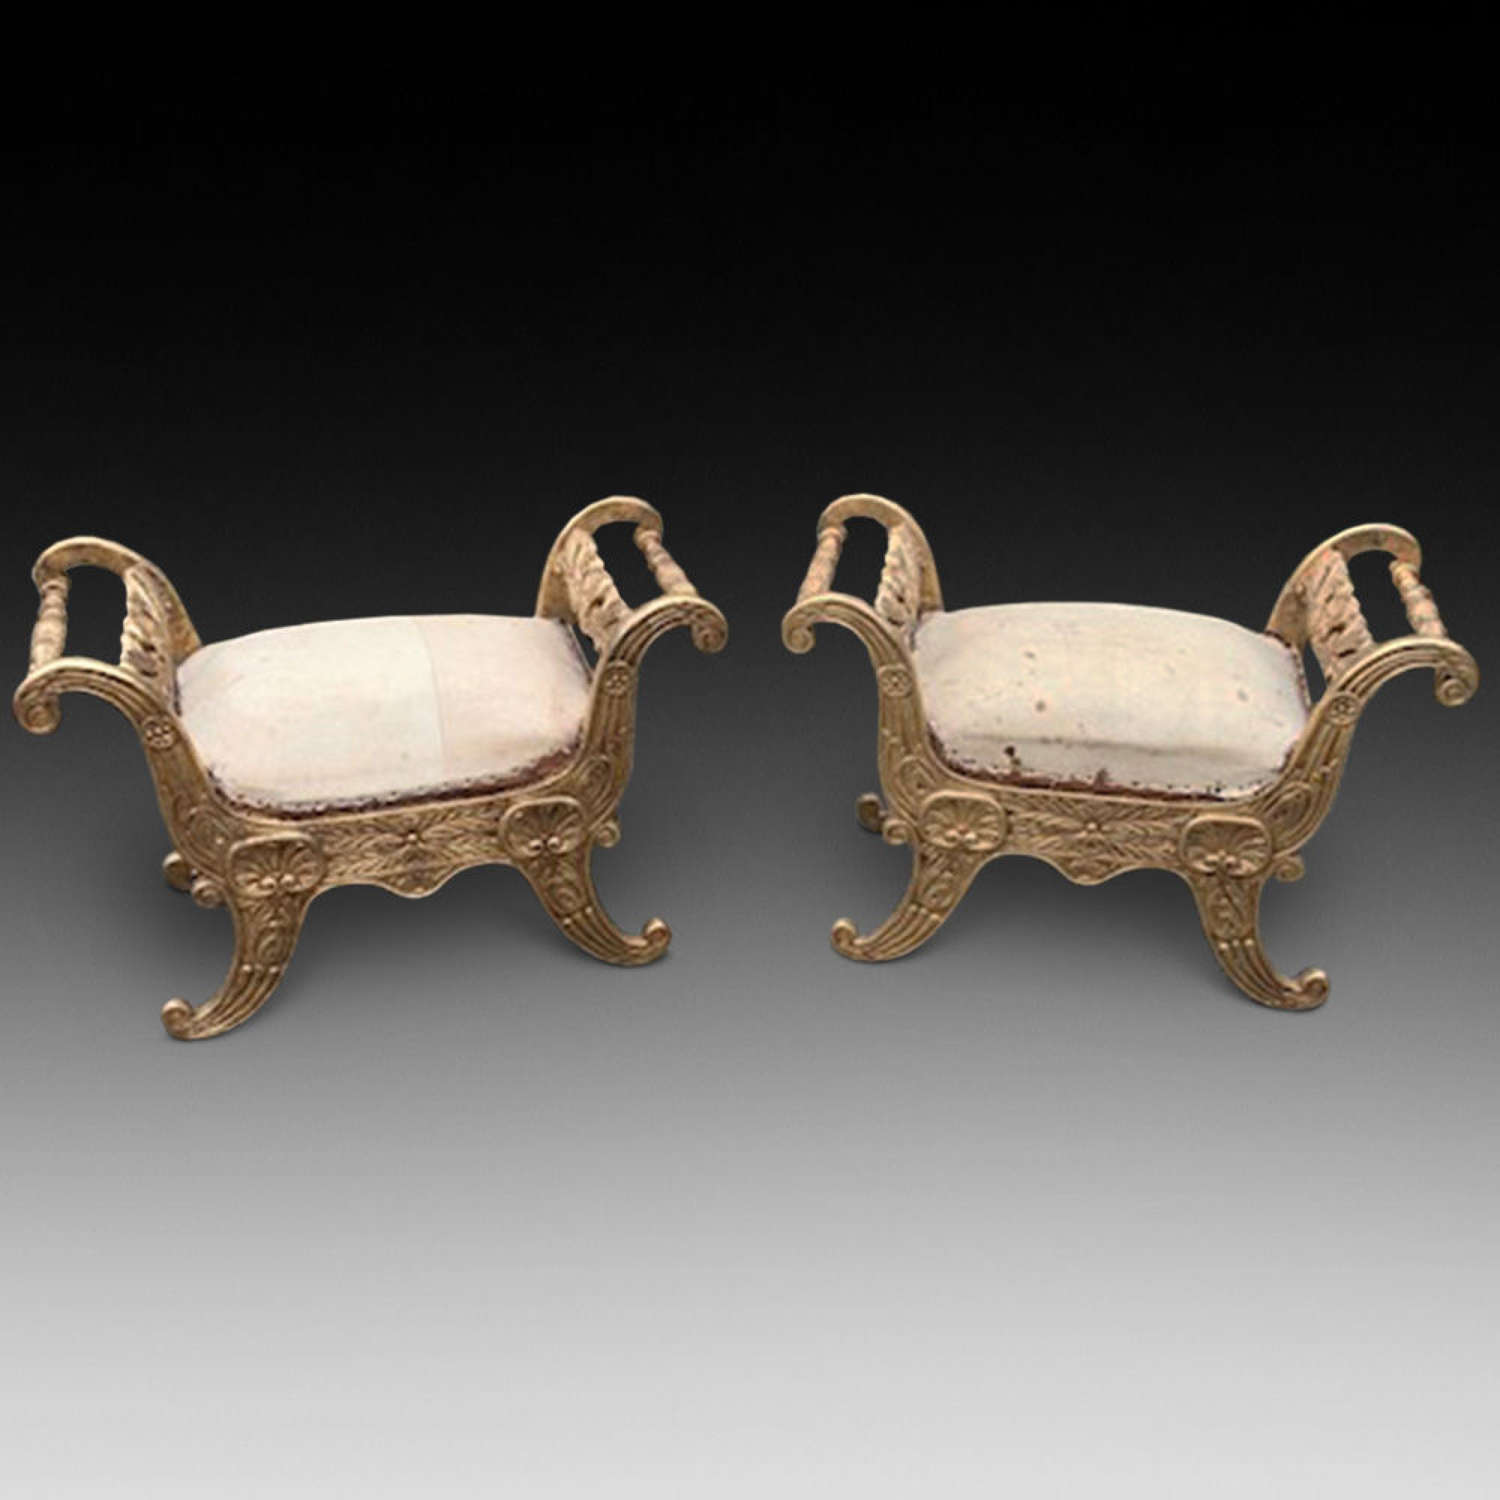 Very Attractive %26 Comfortable Pair of Carved Gilt Window Seats c.183